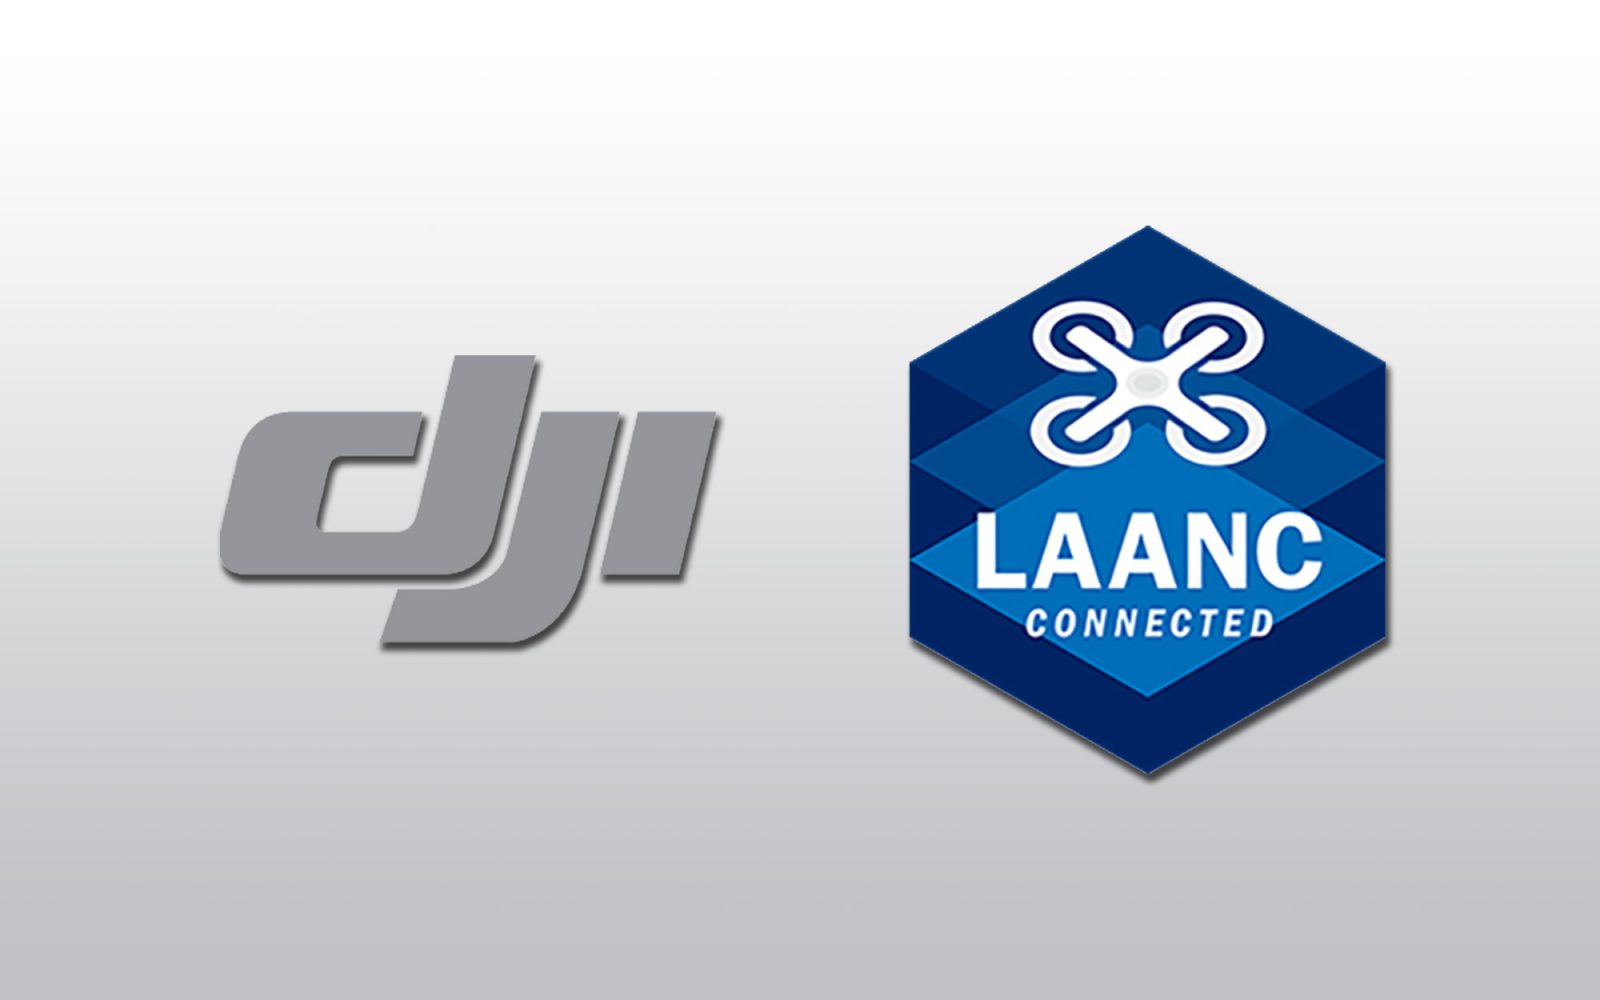 DJI, the world’s leader in civilian drones and aerial imaging technology, has been approved to offer Low Altitude Authorization and Notification Capability (LAANC) services for professional drone pilots.